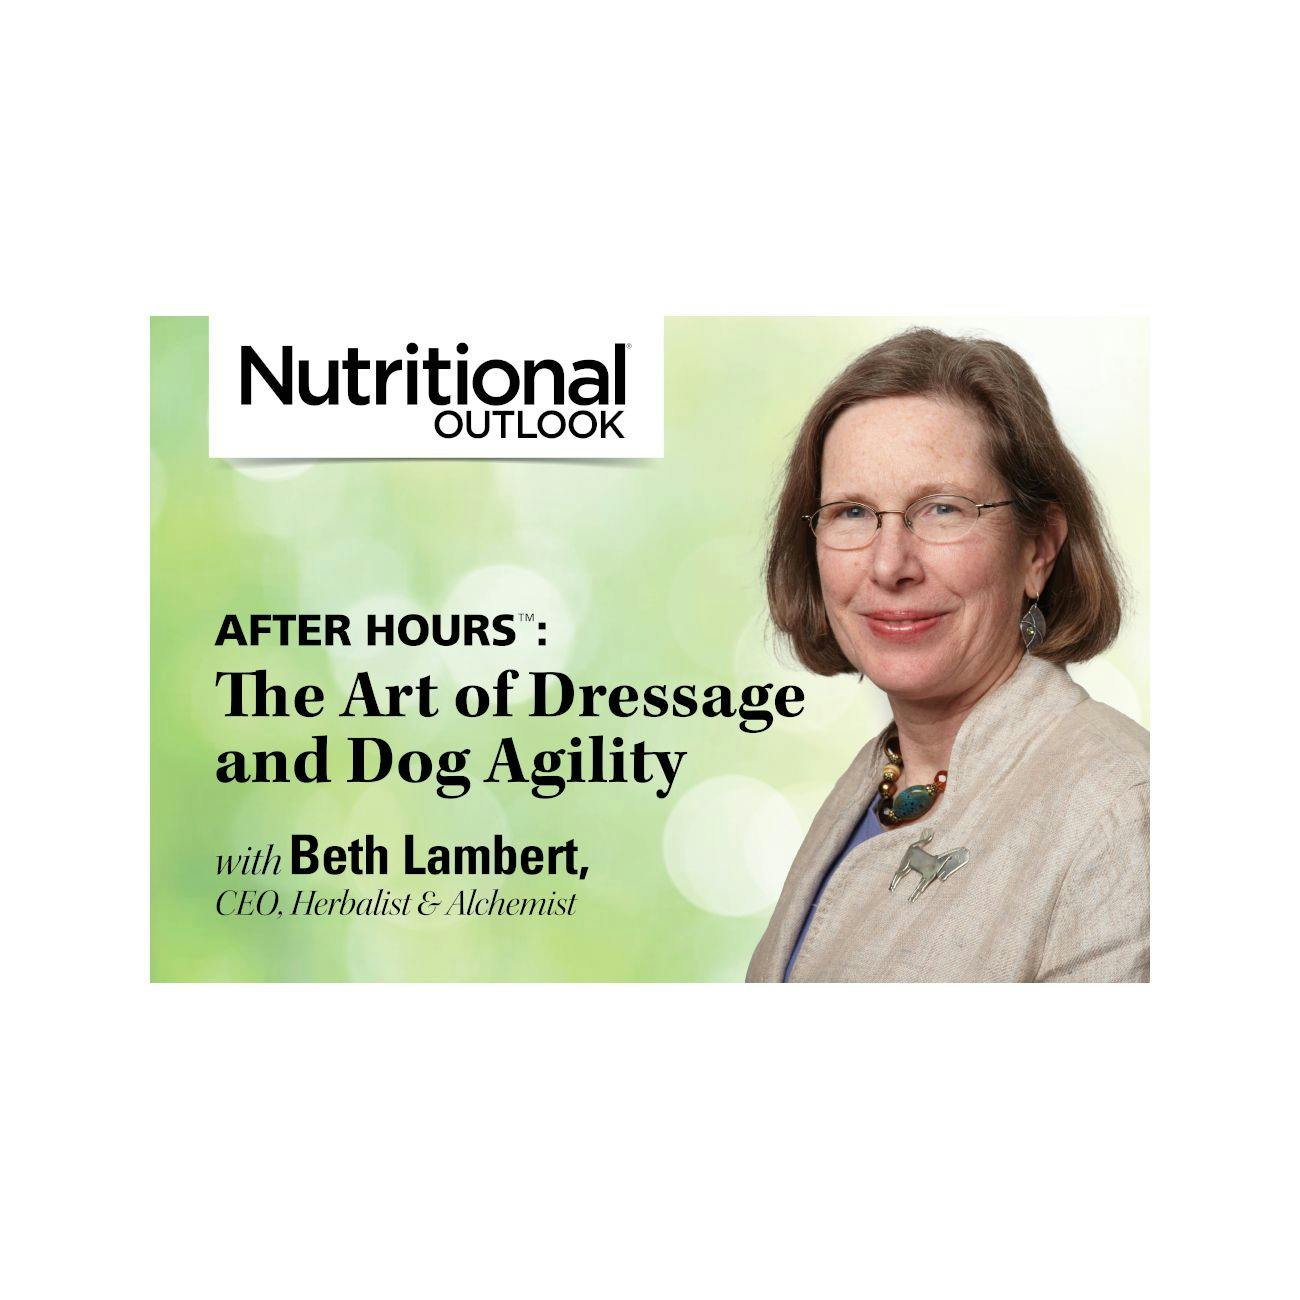 Nutritional Outlook’s “After Hours” Interview: The Art of Dressage and Dog Agility